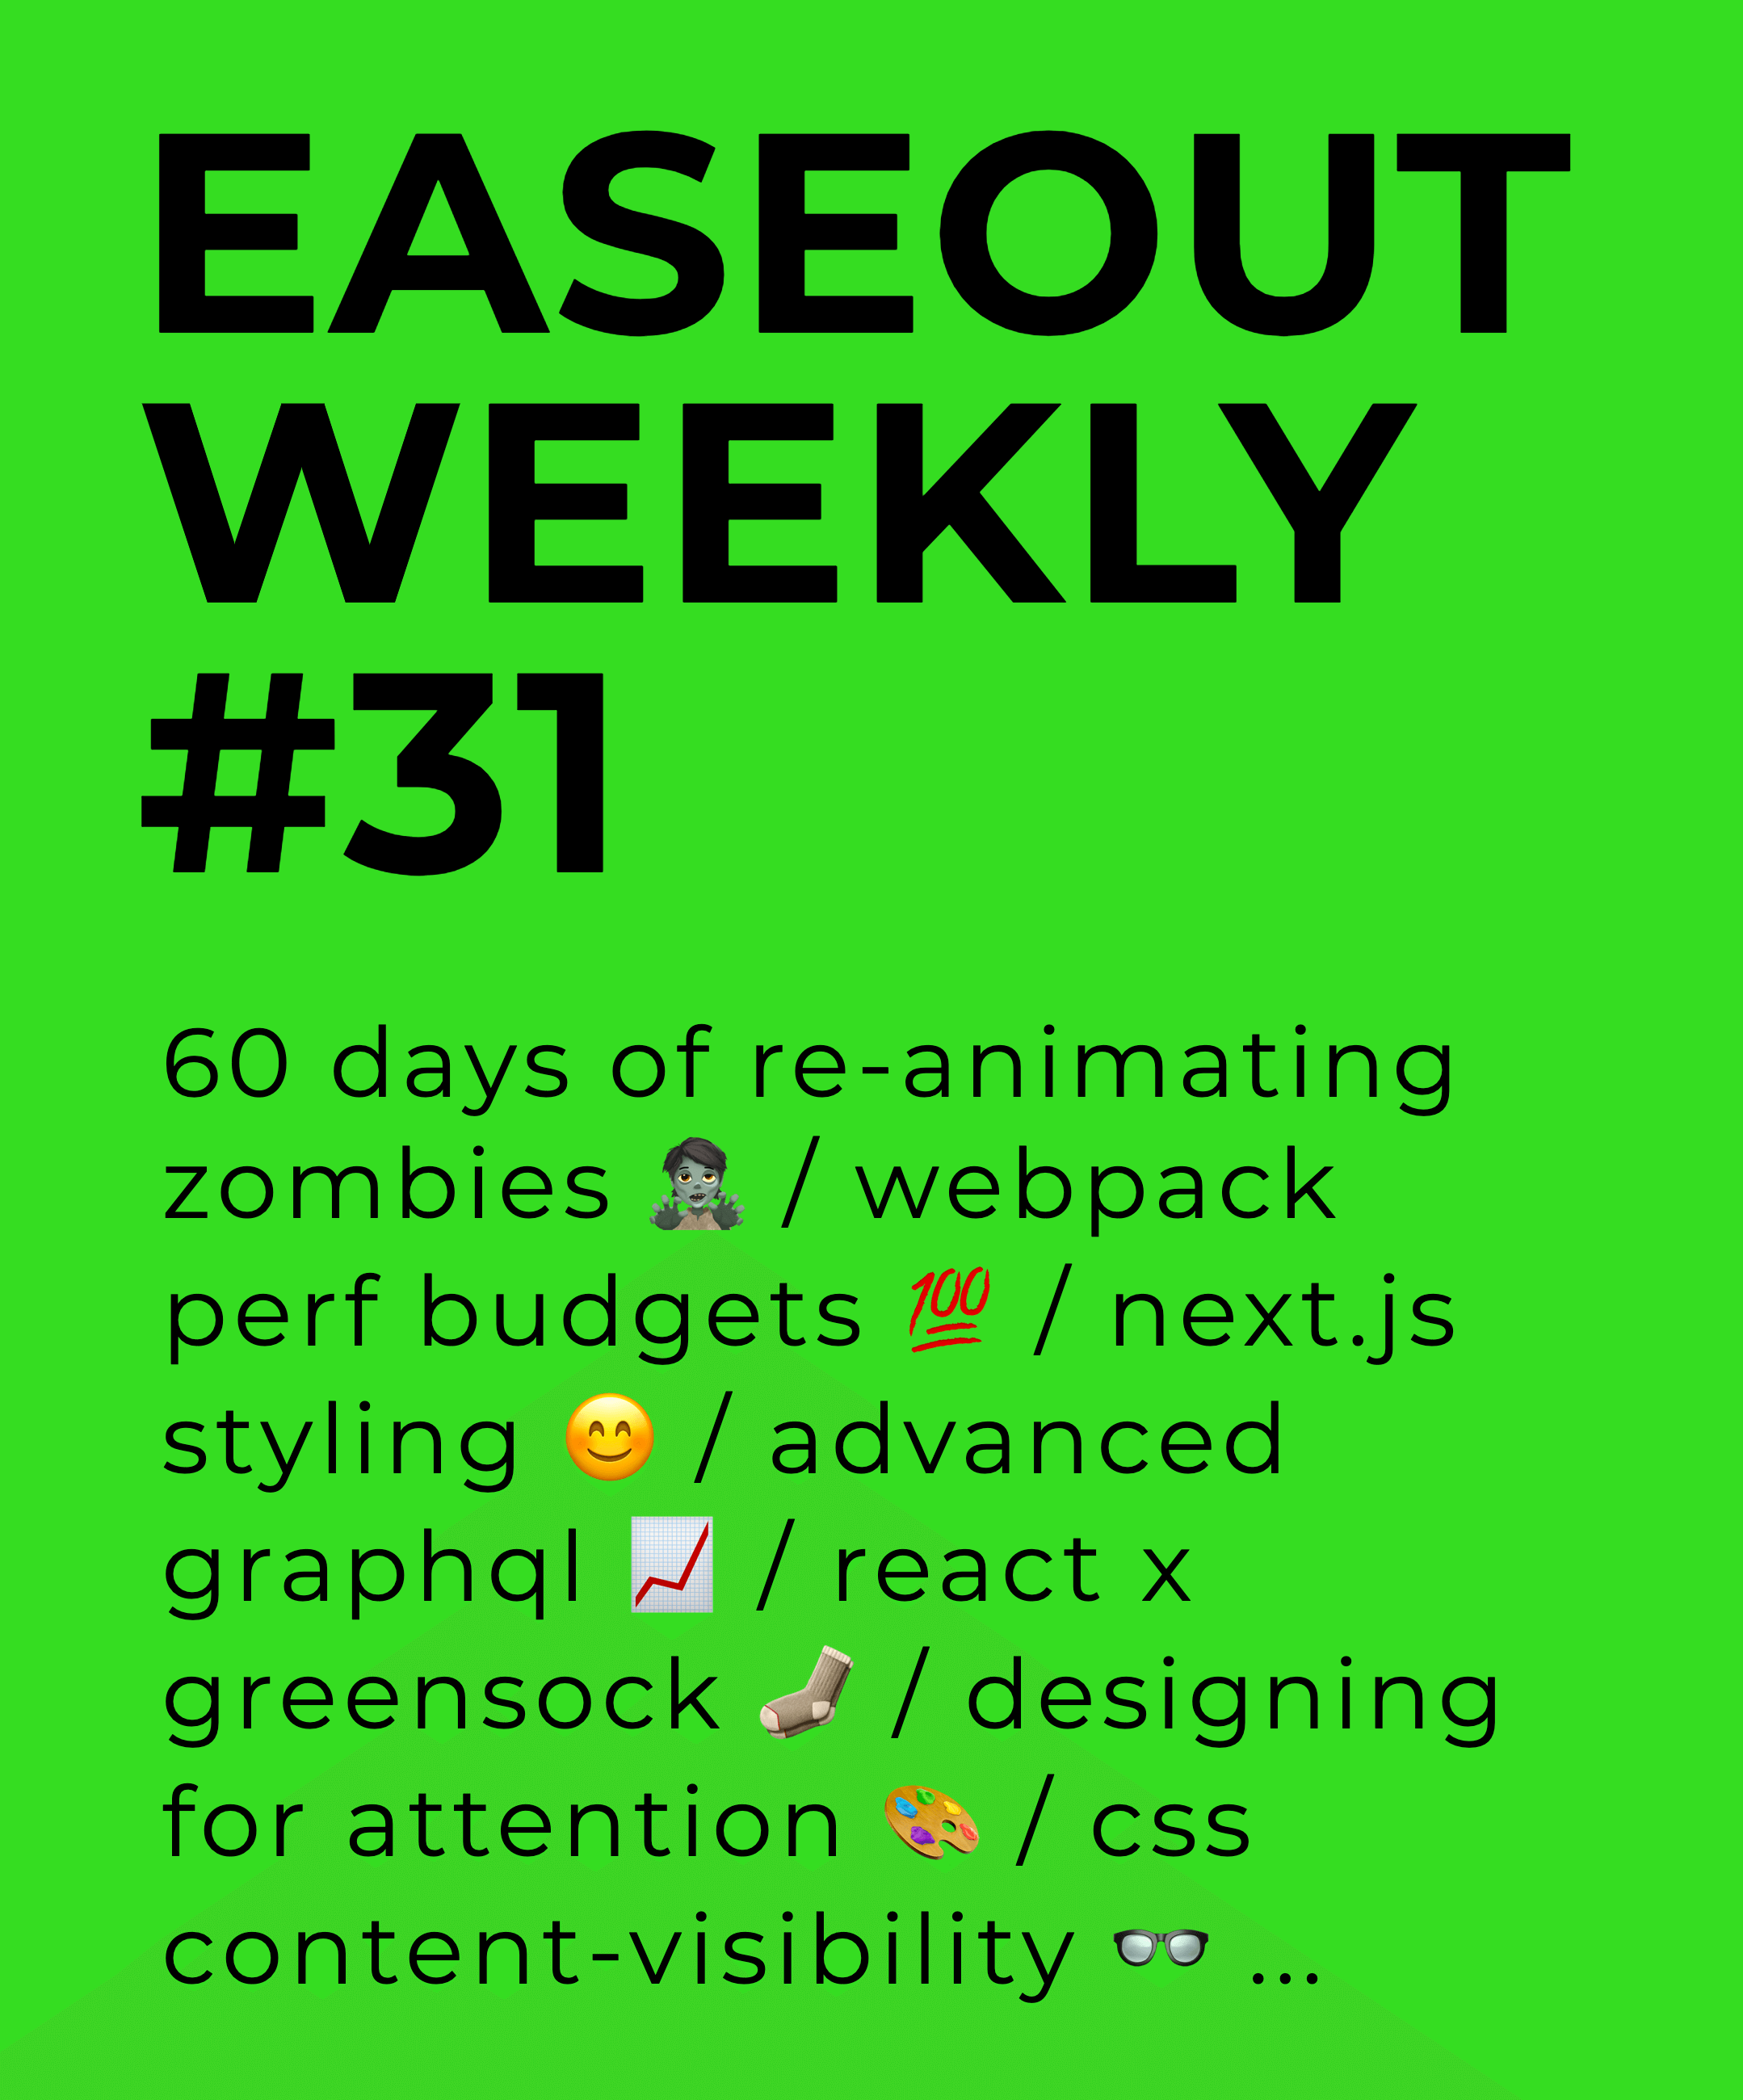 Easeout Weekly #31